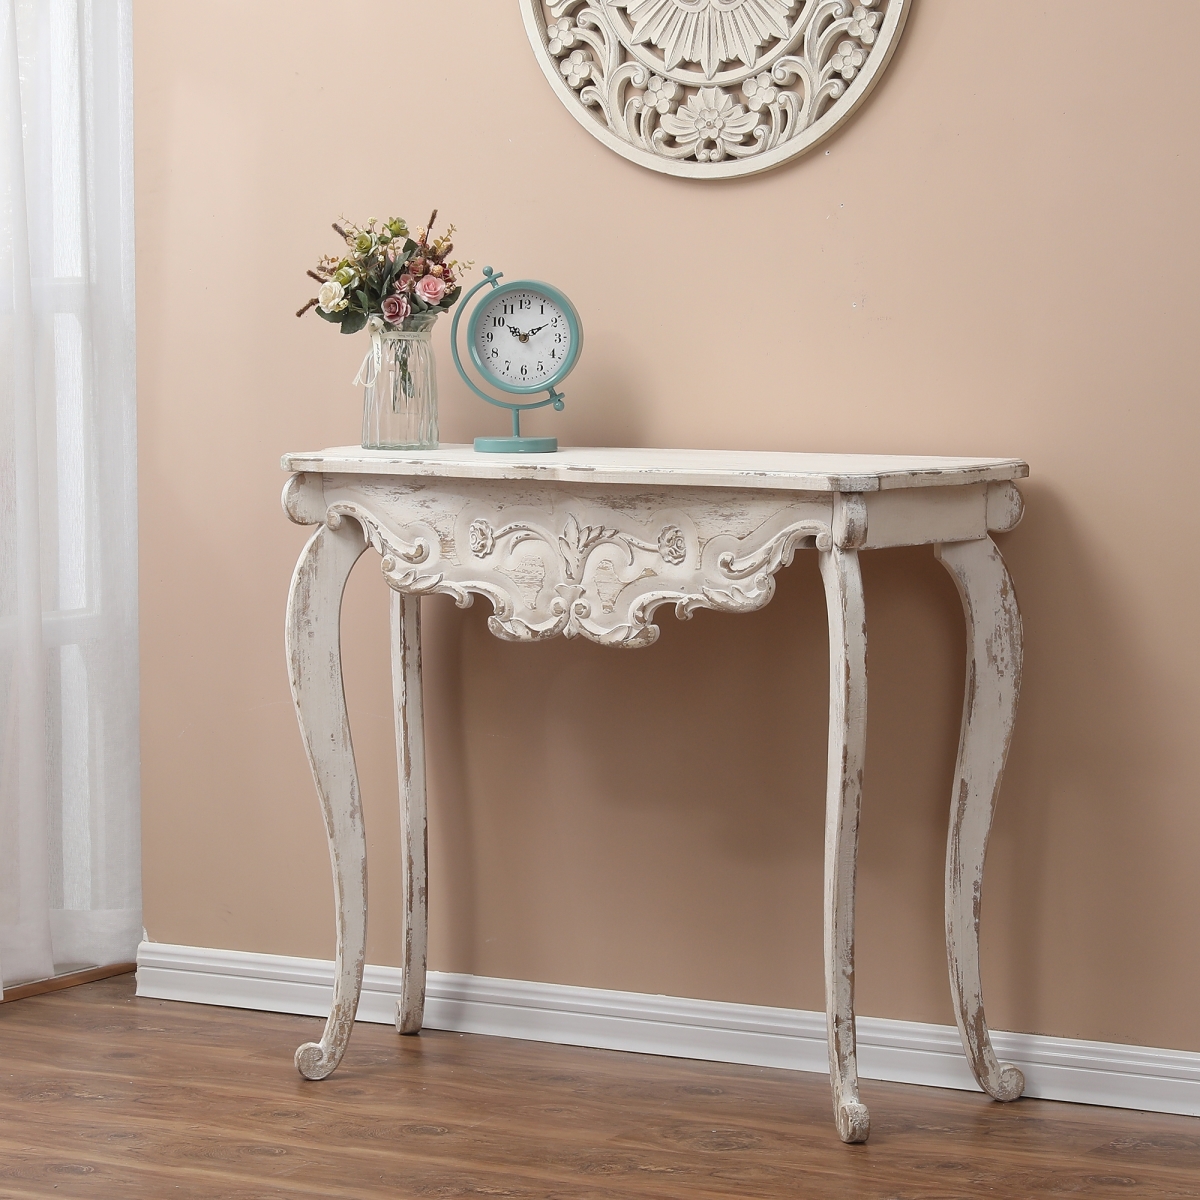 Whif789 Wood Vintage Console & Entry Table